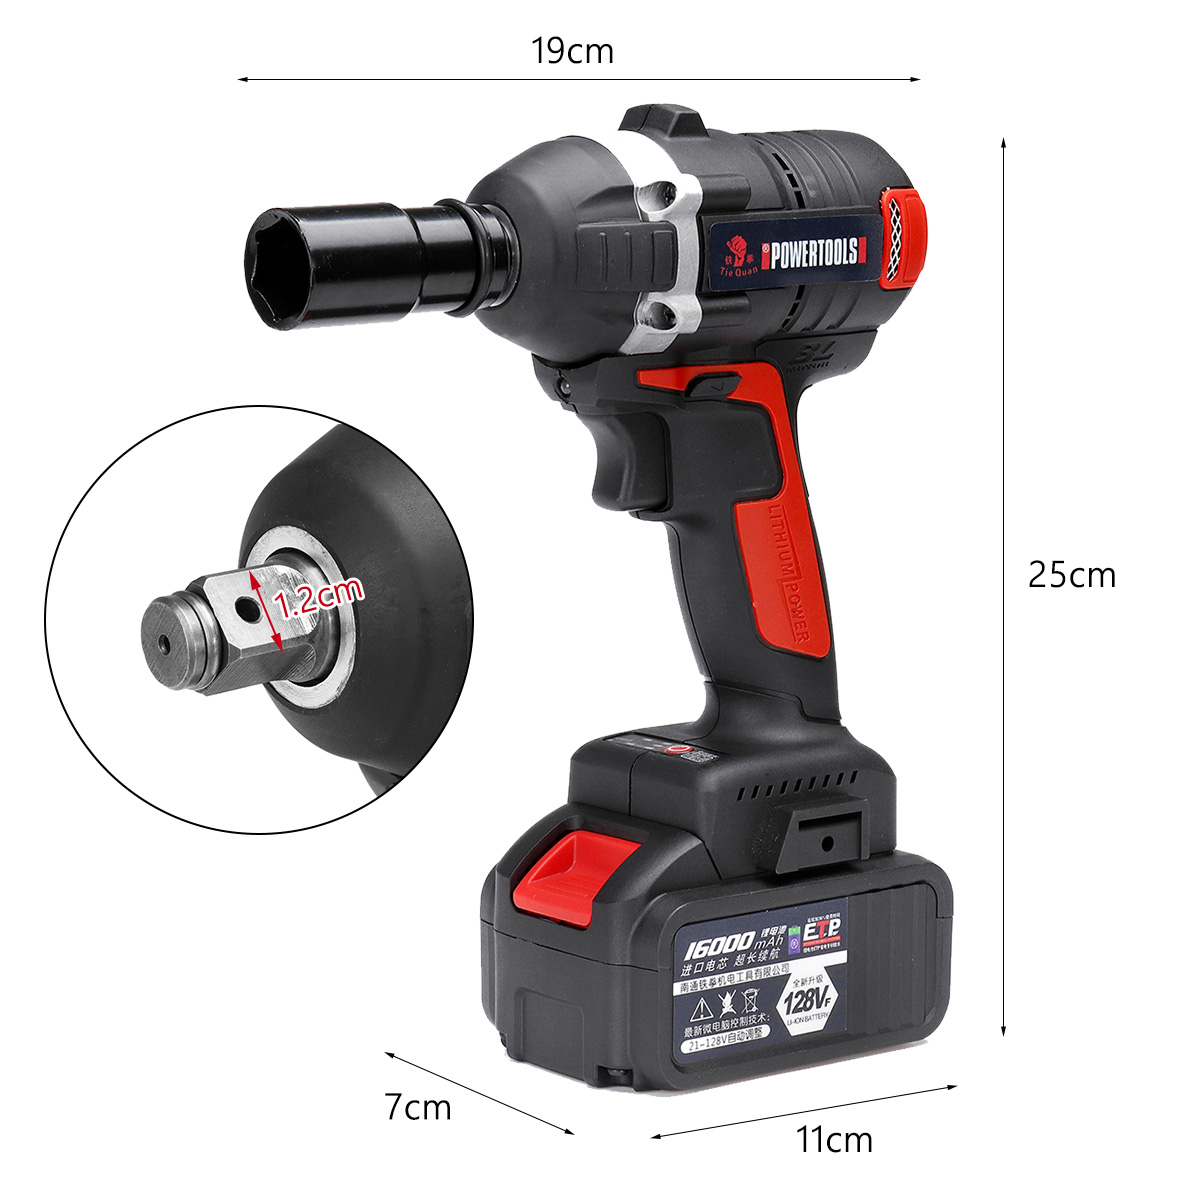 128VF-16000mah-Brushless-Electric-Wrench-Power-Wrench-Tool-330Nm-Cordless-Wrench-Kit-1437430-5